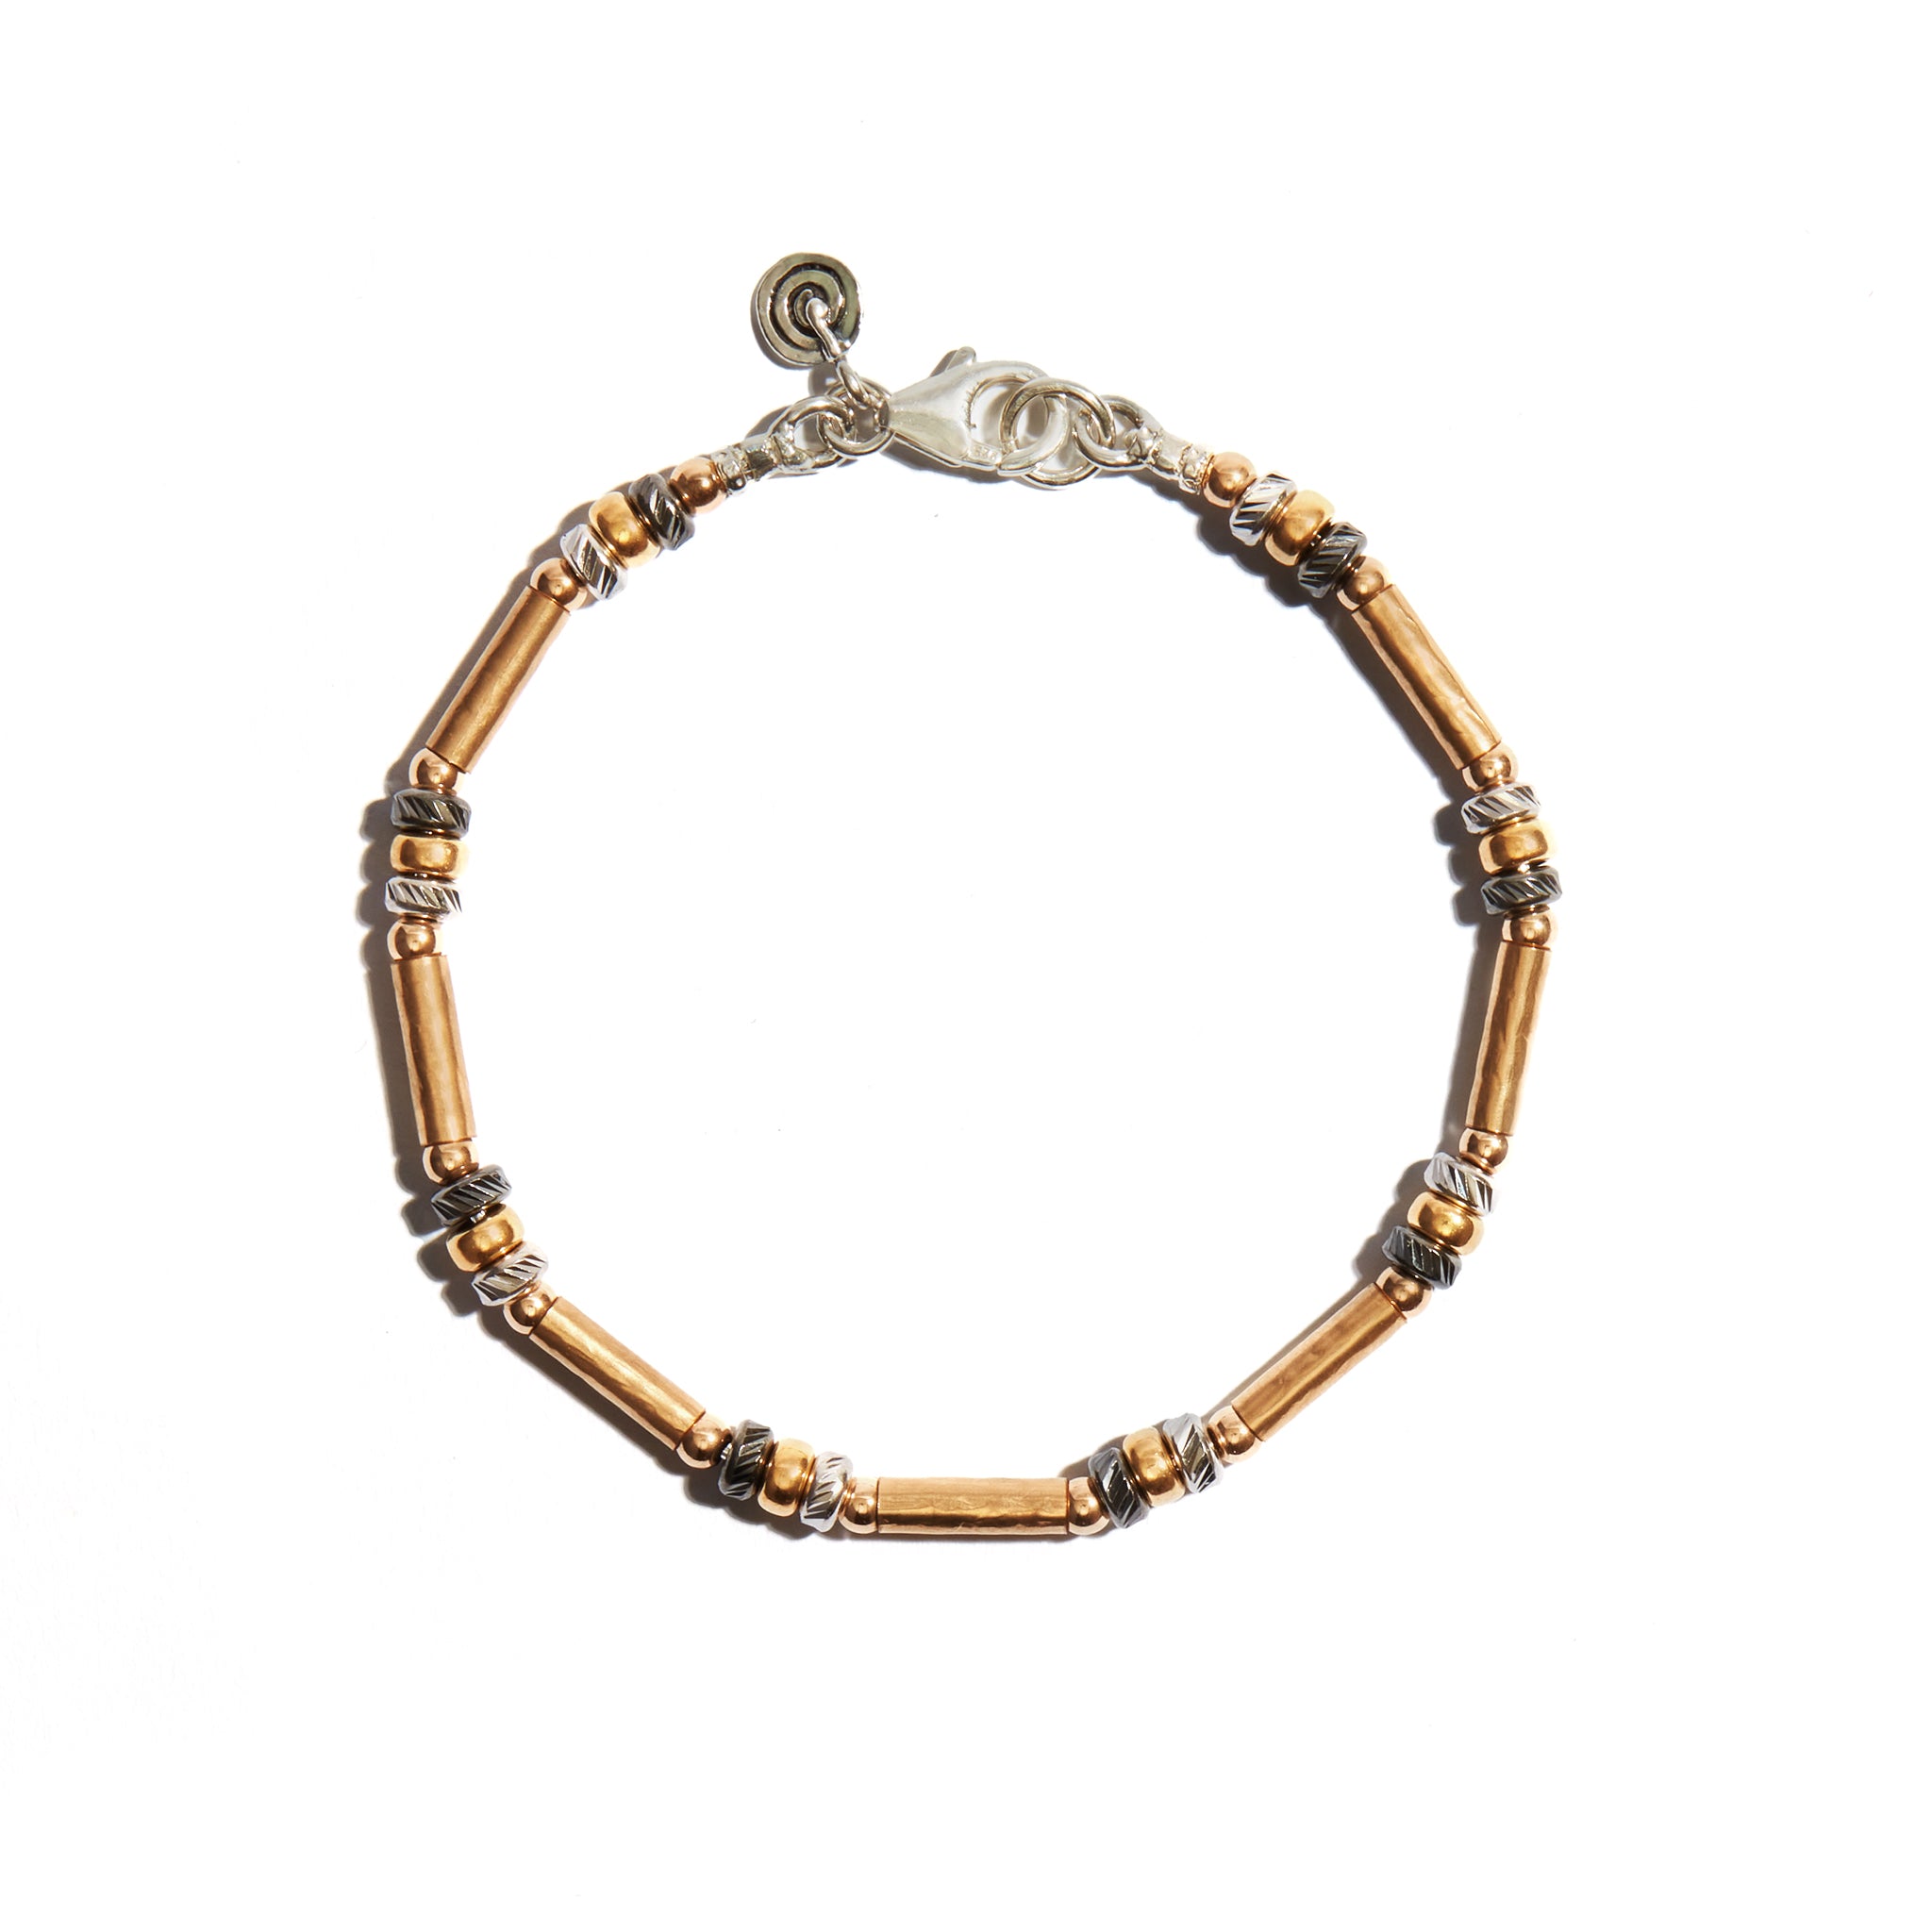 A stunning Gold And Oxidized Three Tone bracelet featuring delicate yellow gold bars, crafted from 14ct gold fill for a luxurious look.